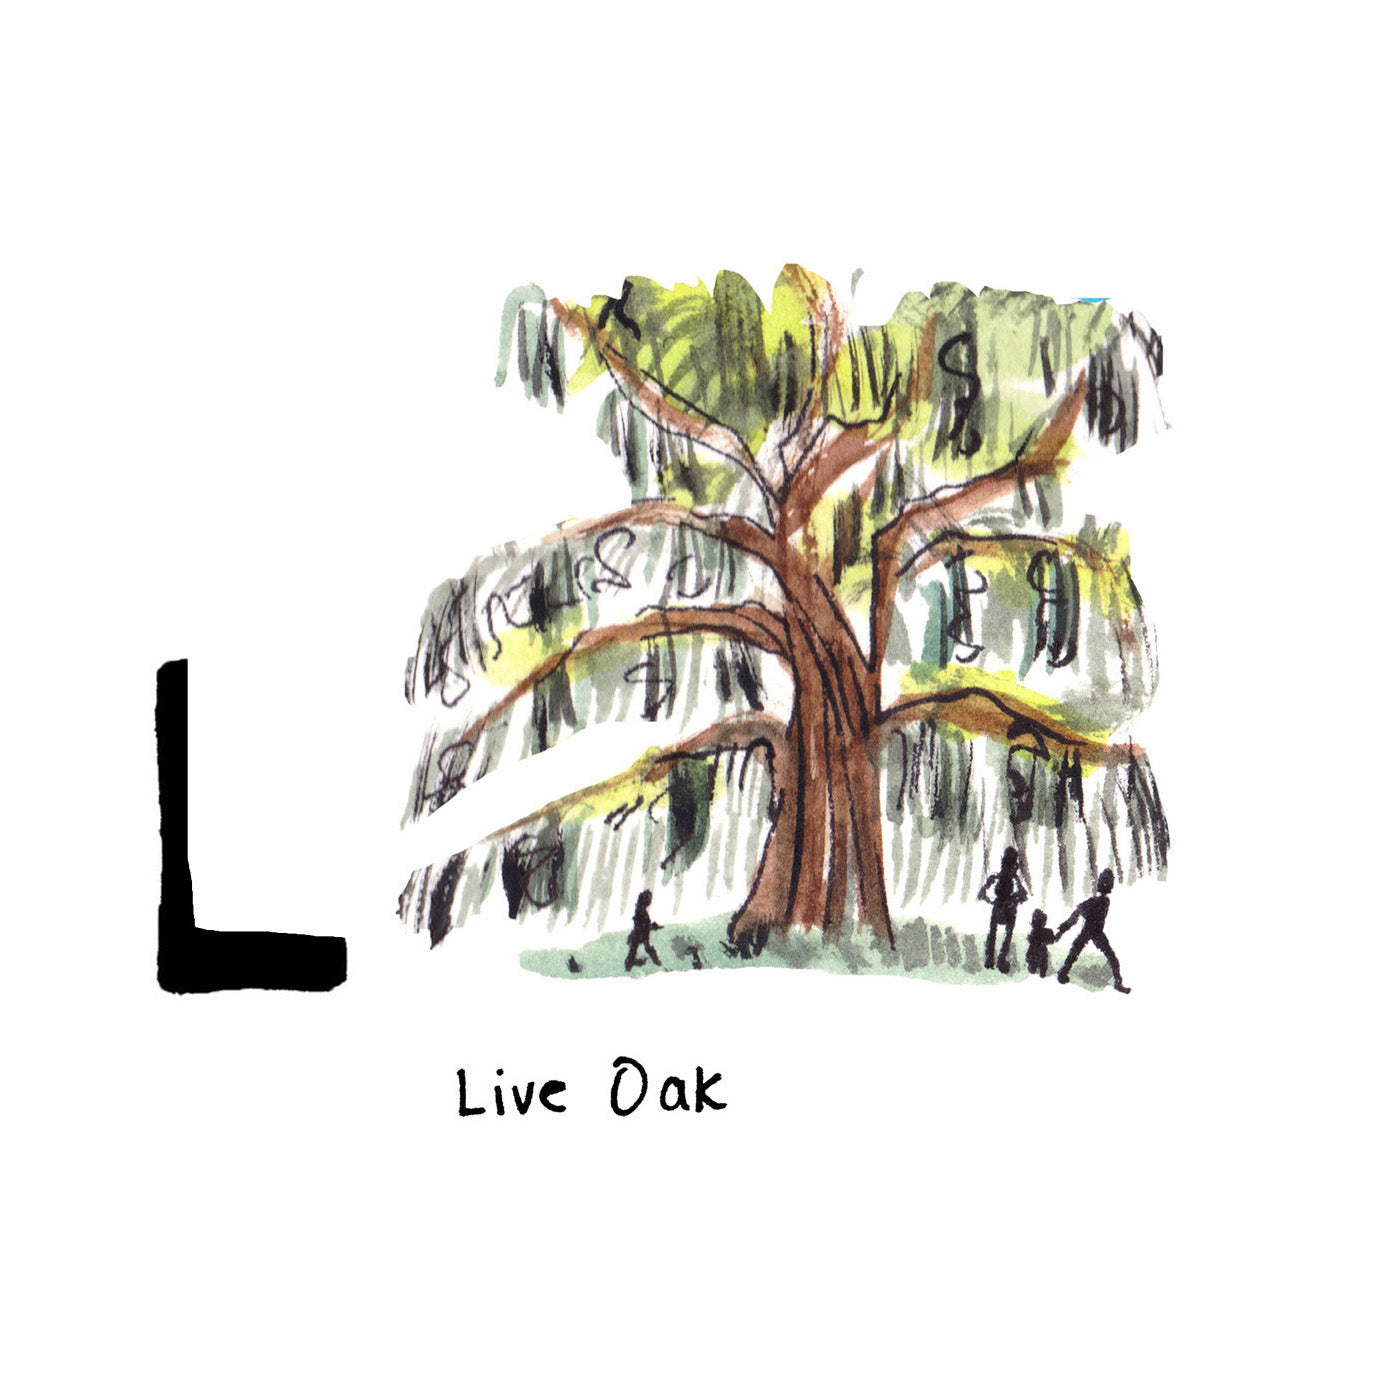 L is for Live Oak. The Angel Oak is a Southern live oak tree located on Johns Island. It is estimated to be 400-500 years old, with a shaded area that covers around 17,500 square feet. 